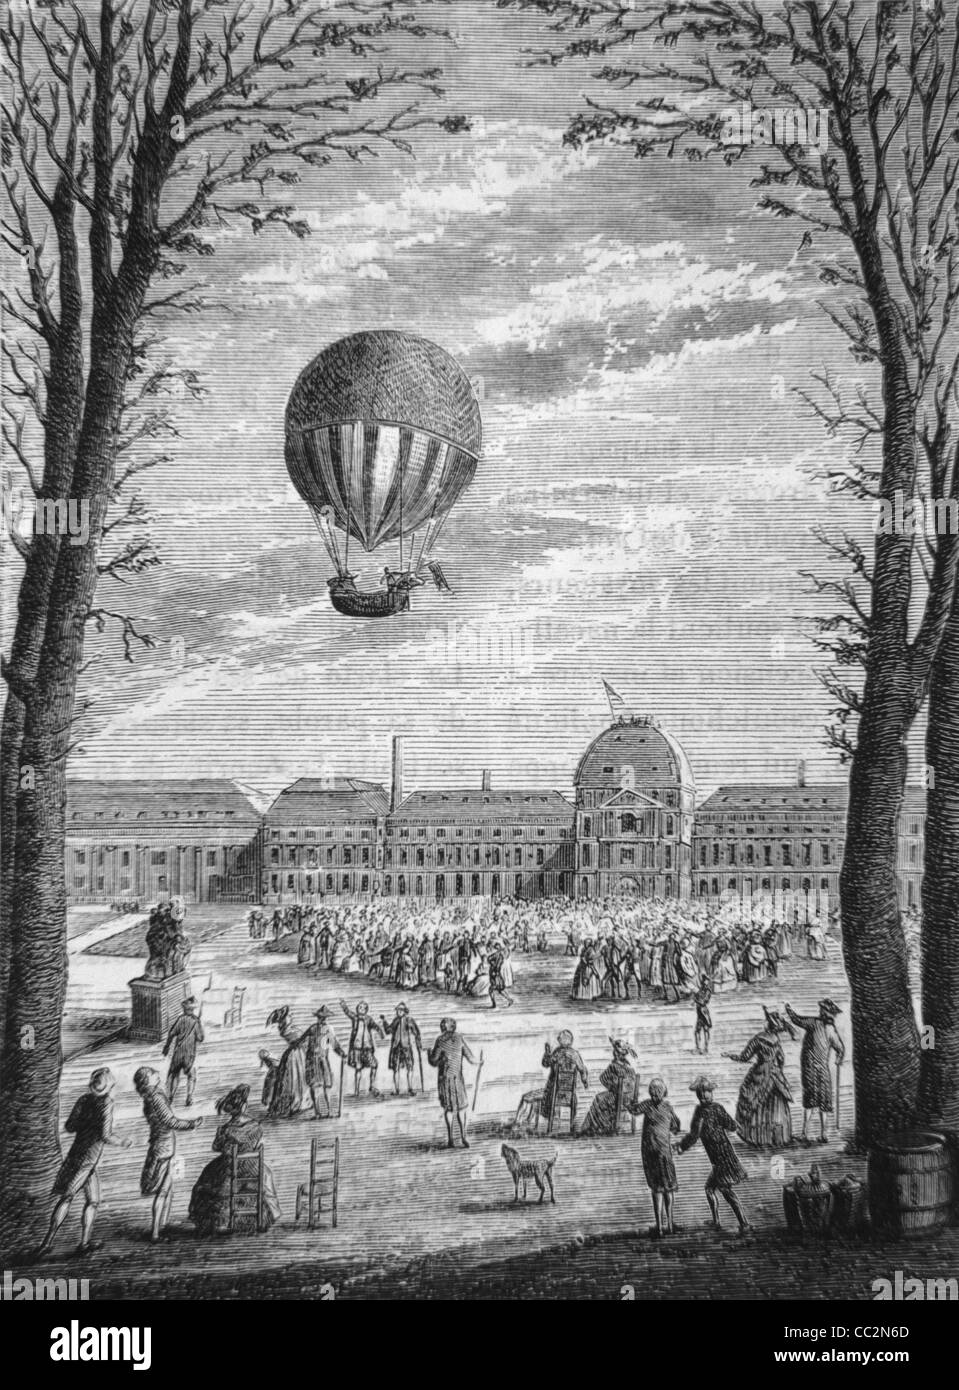 First Voyage in Hydrogen Hot Air Montgolfier Balloon Above Paris in November 1783. c19th Engraving or Illustration Stock Photo